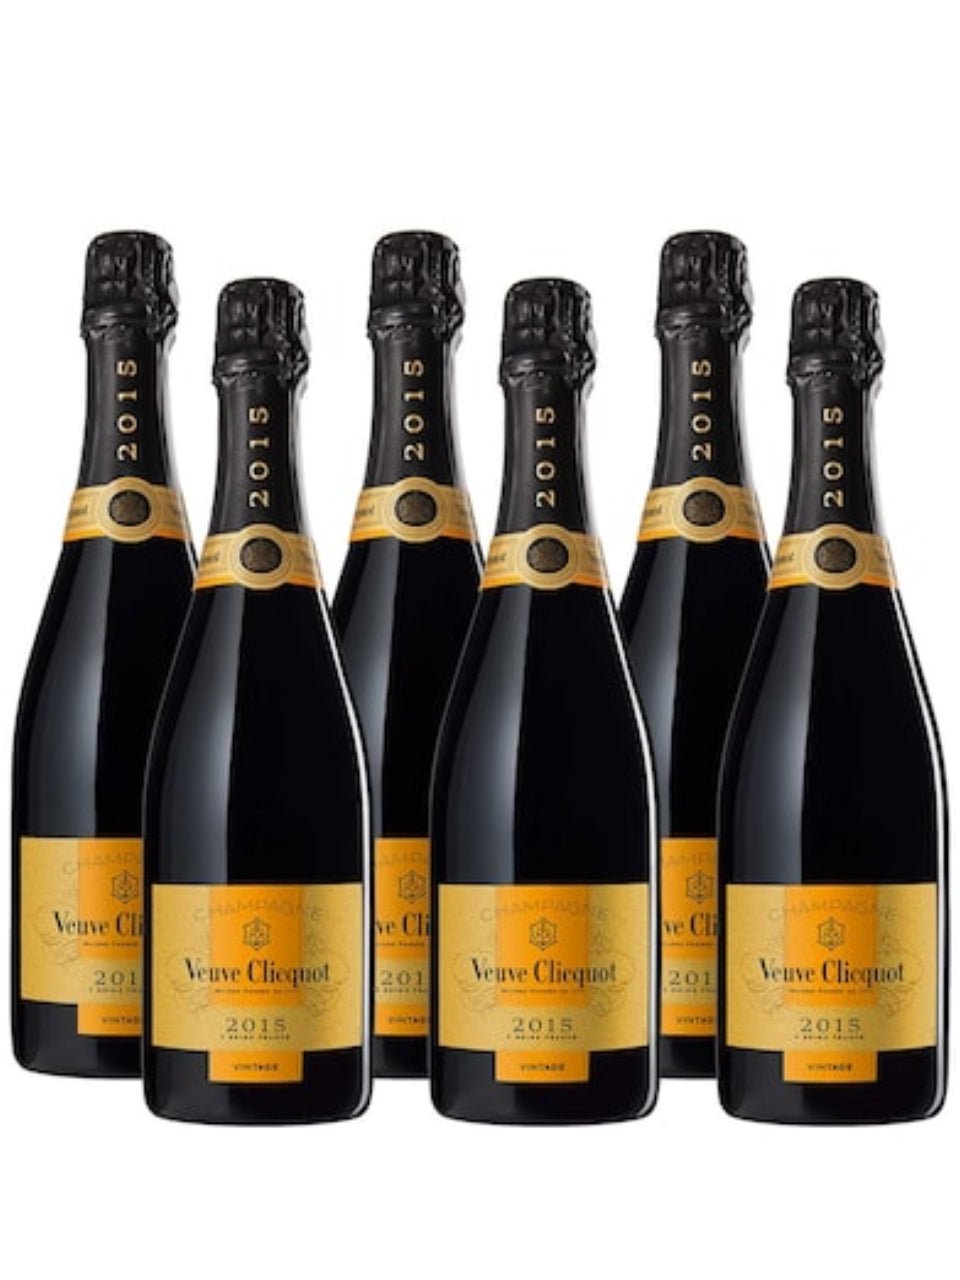 Veuve Clicquot Ponsardin Brut Vintage Champagne Collection - Case of 6 | Exquisite Wine & Alcohol Gift Delivery Toronto